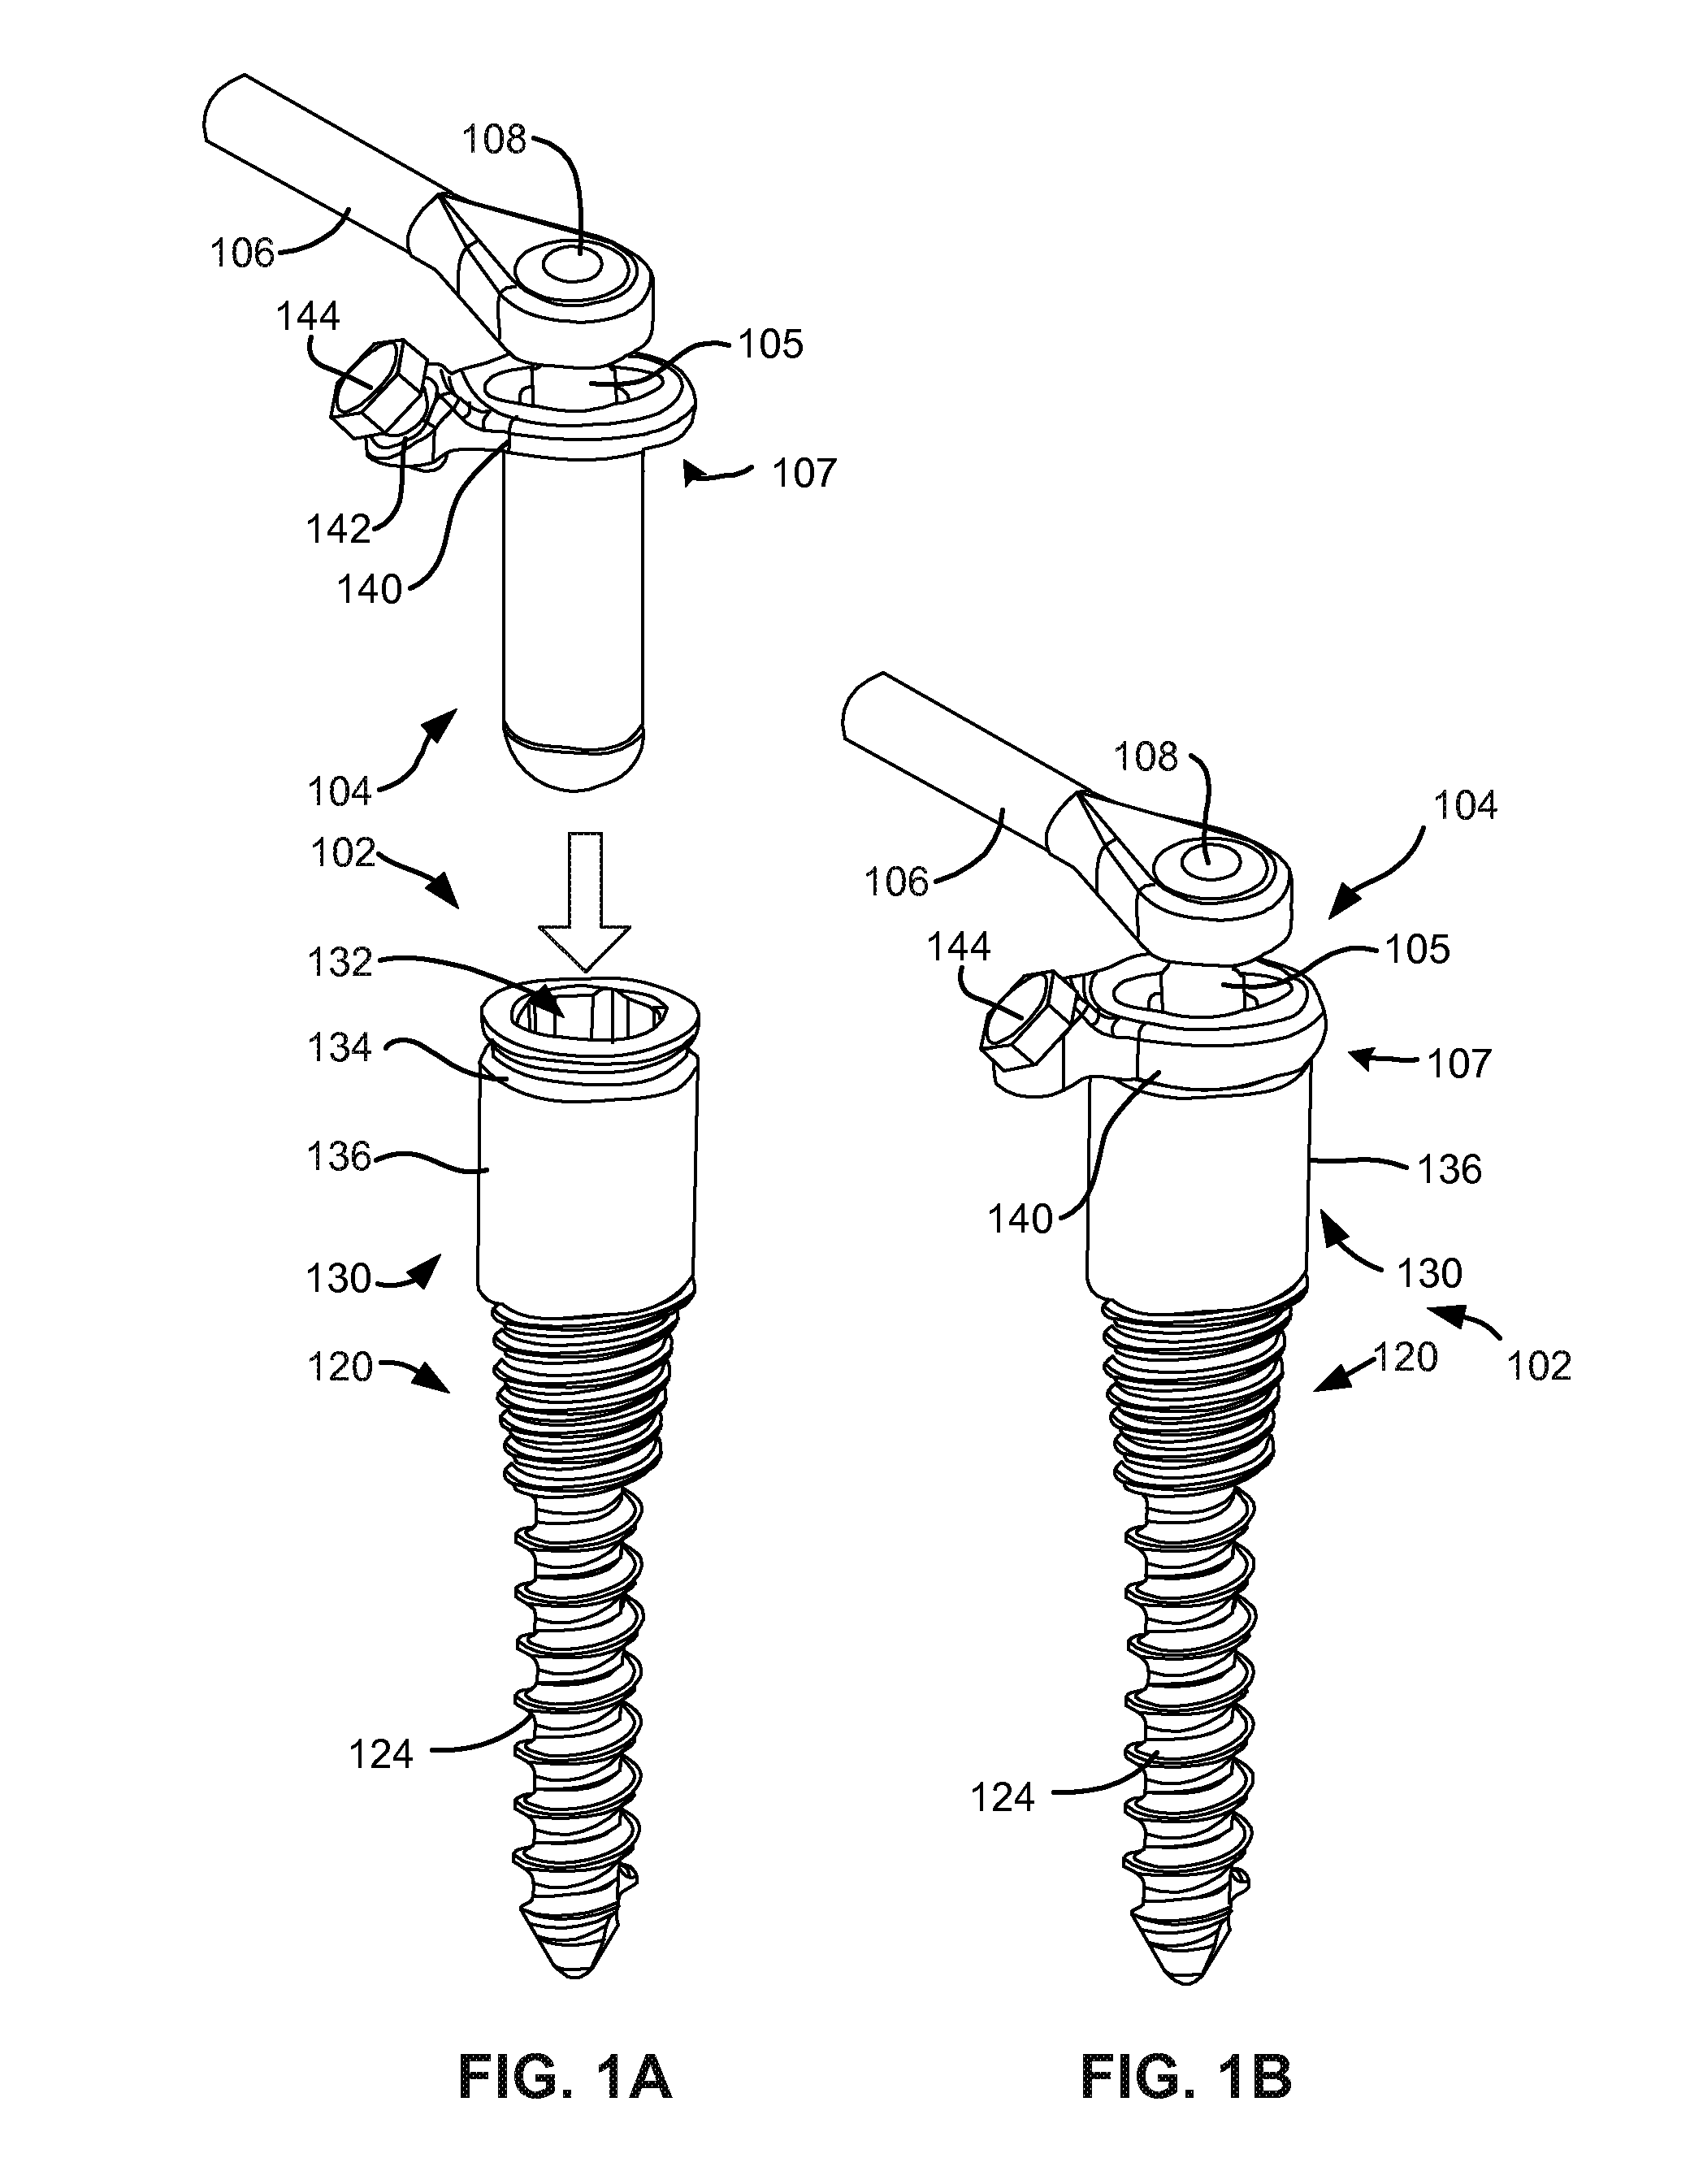 Spinal prosthesis having a three bar linkage for motion preservation and dynamic stabilization of the spine